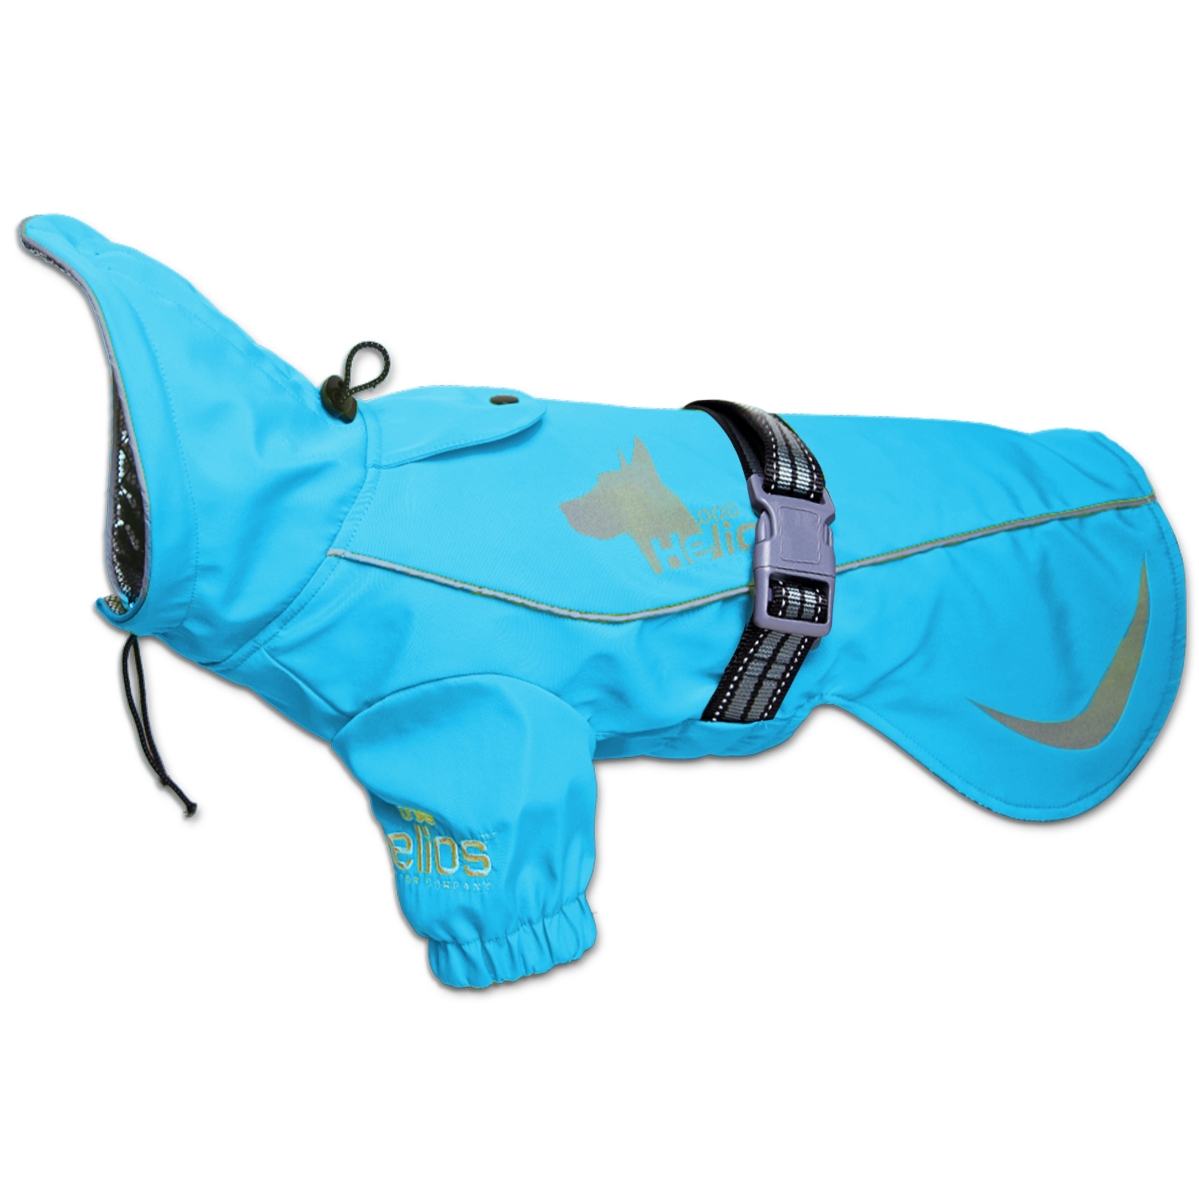 Picture of Dog Helios JKHL16BLSM Ice-Breaker Extendable Hooded Dog Coat with Heat Reflective Tech - Blue - Small